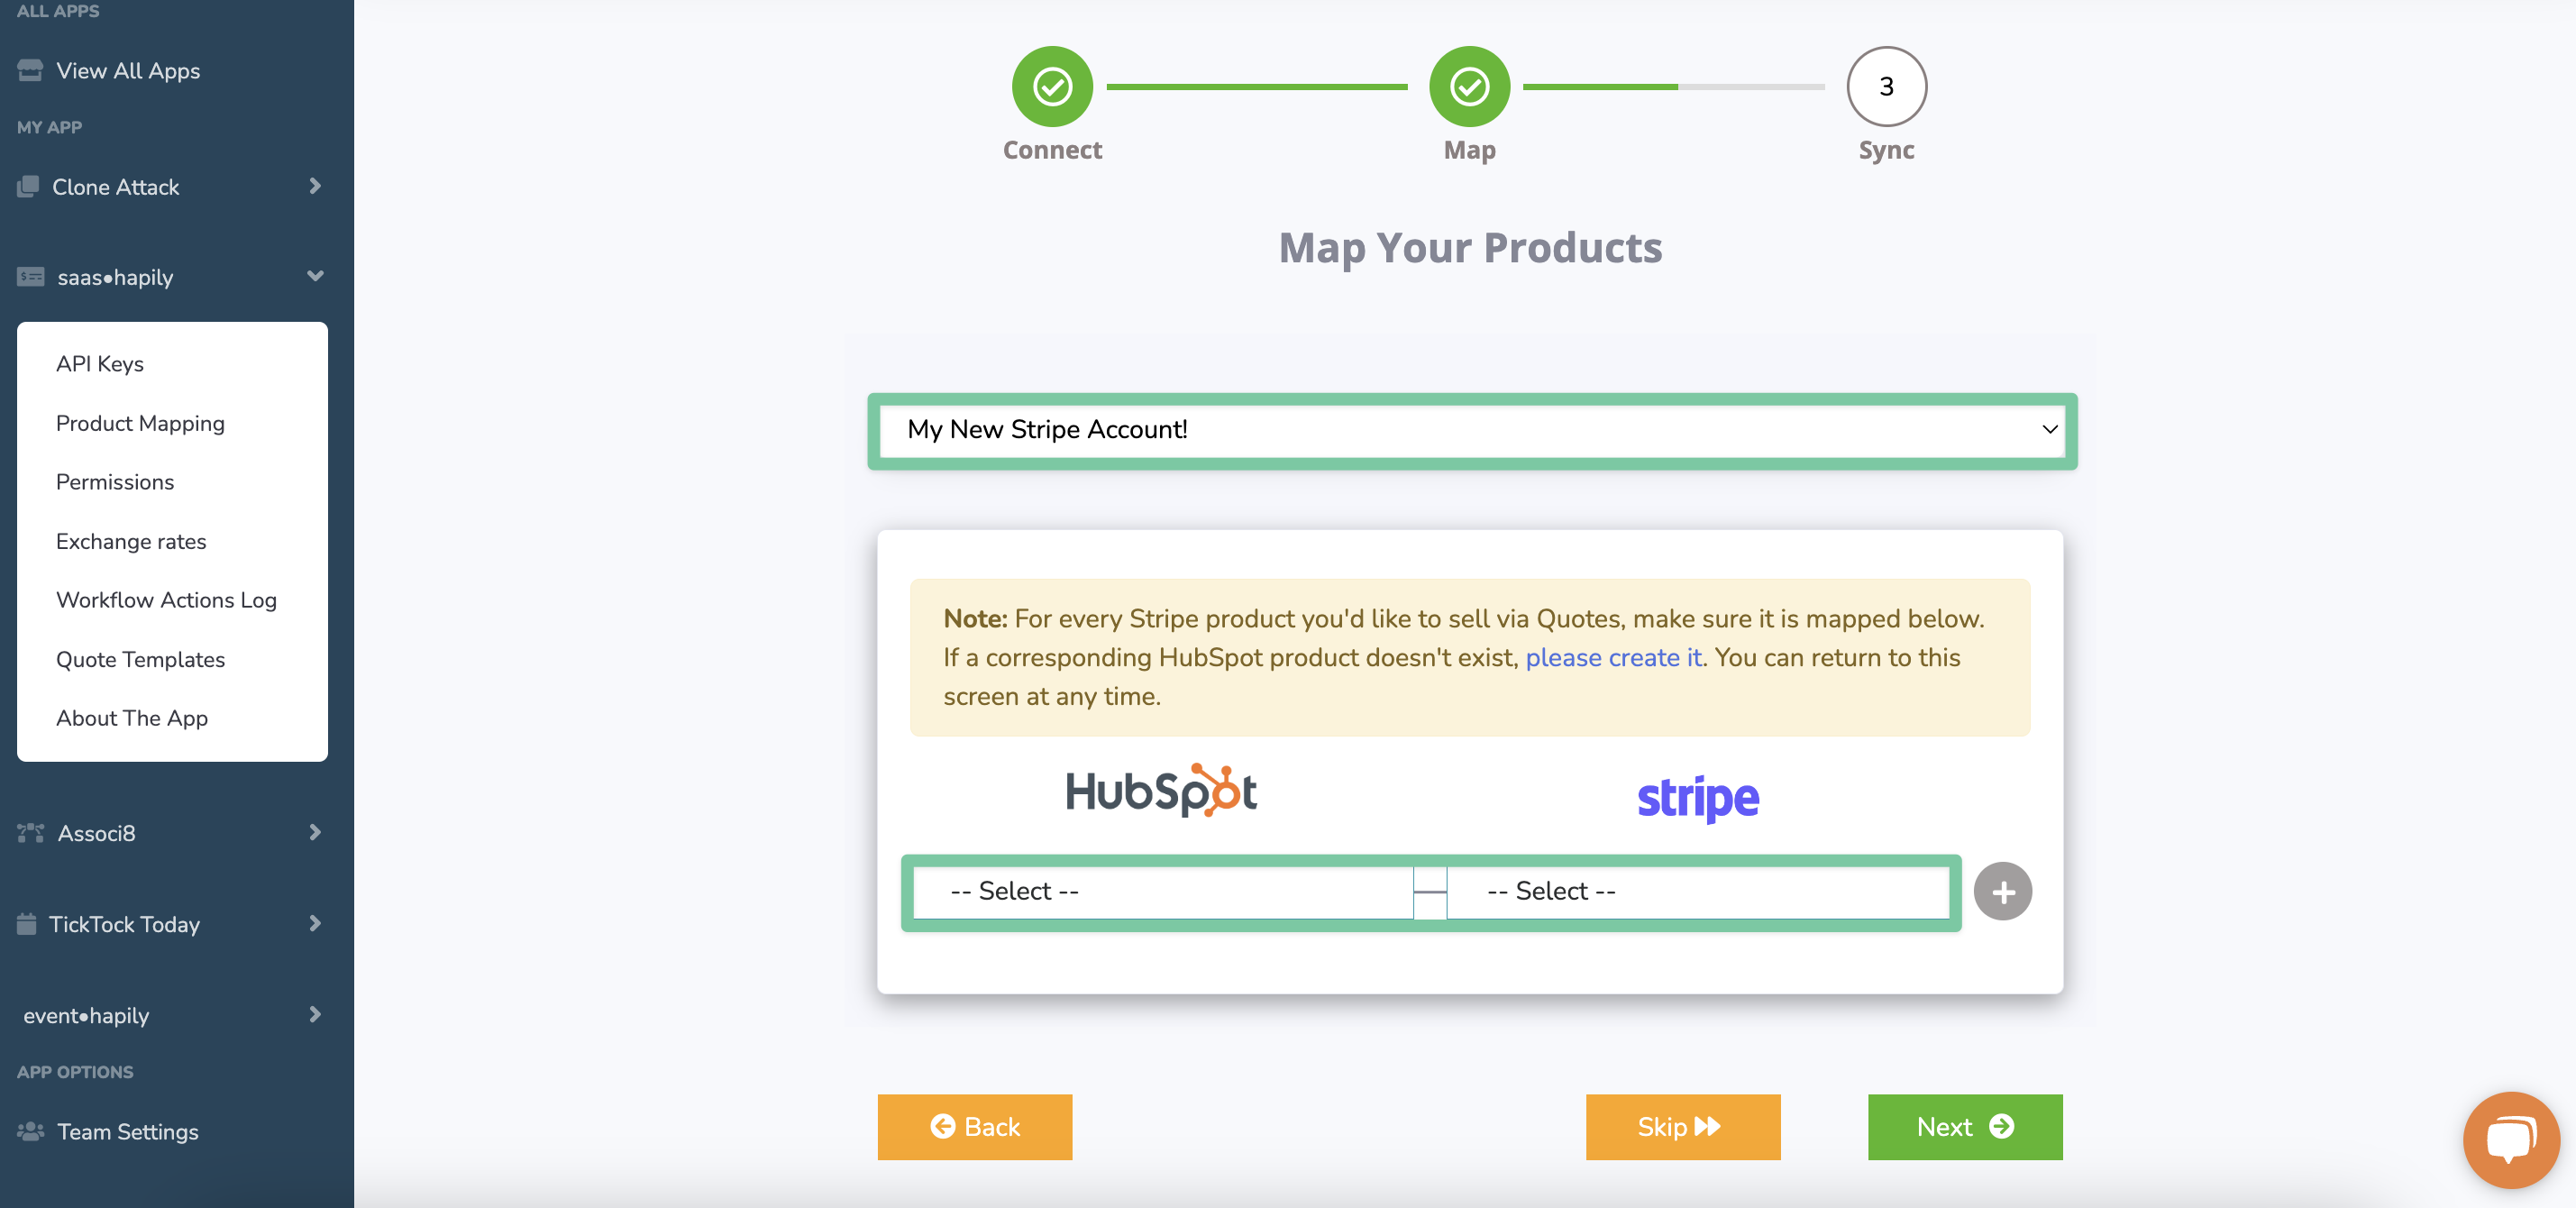 Mapping products from multiple Stripe accounts to HubSpot